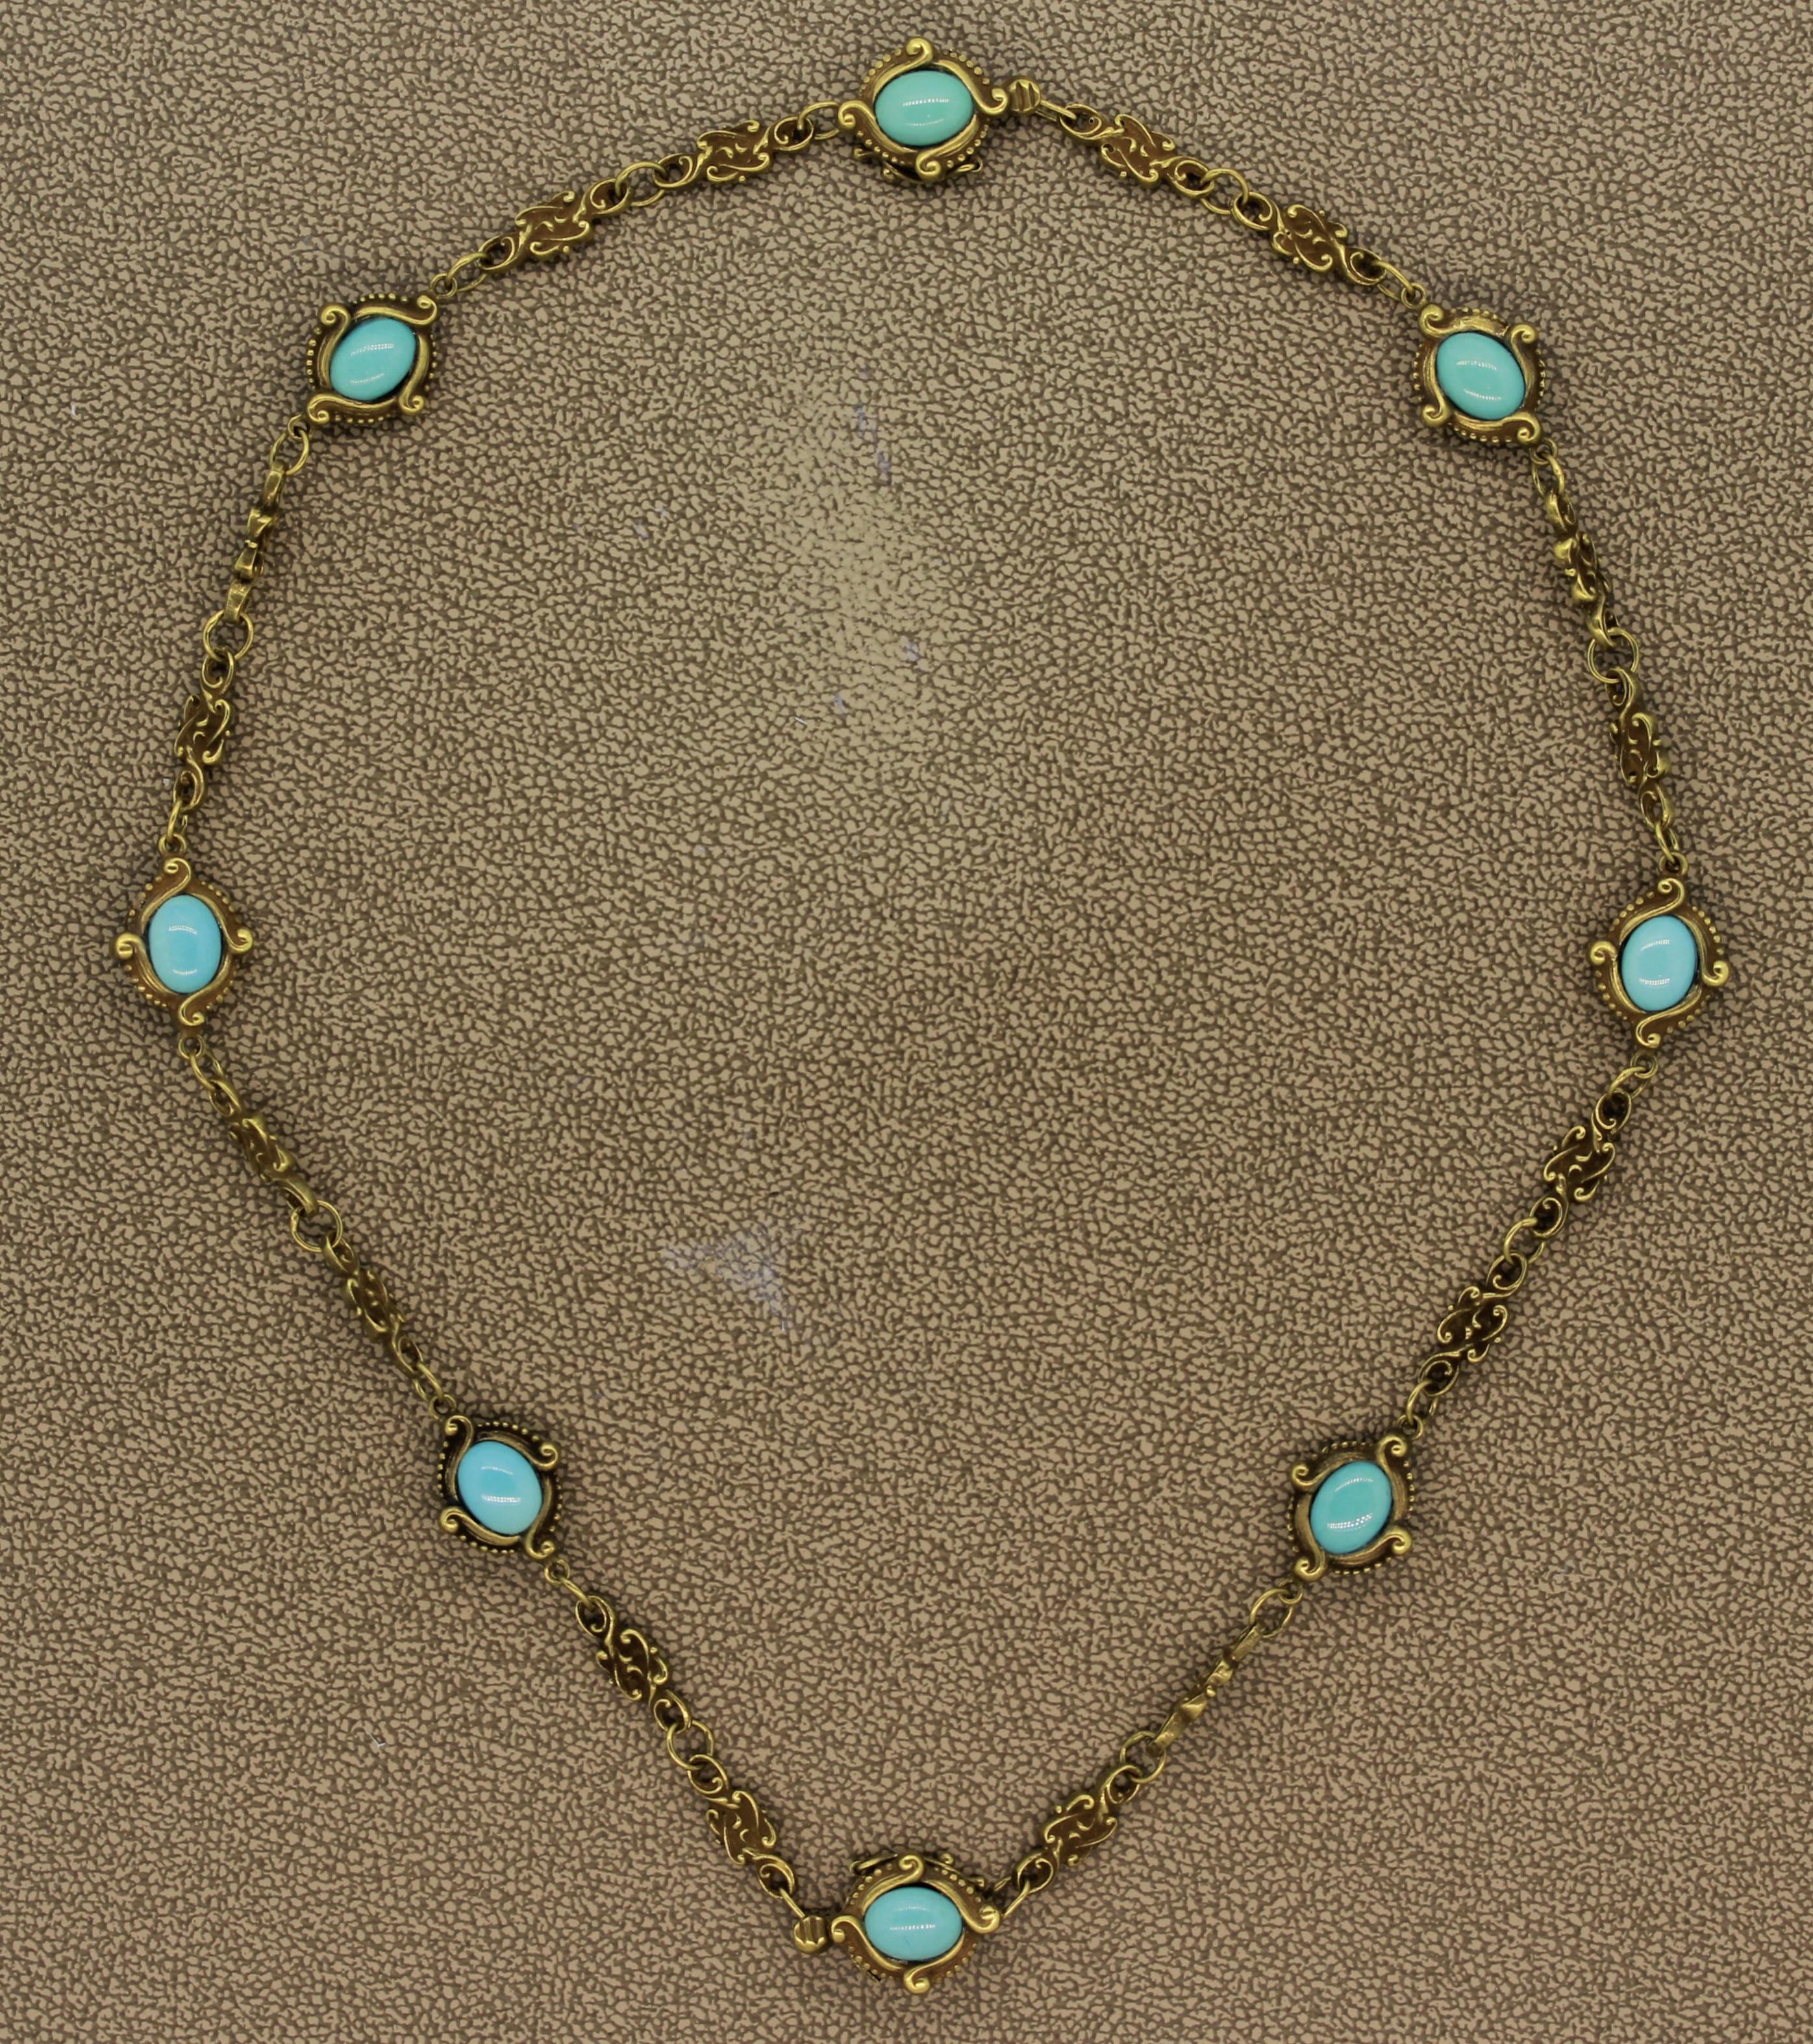 A super stylish treasure from the turn of the 20th century. This Art Nouveau treasure features 8 beautifully colored sky blue turquoise matching in color and shape. They are set in hand fabricated 14k yellow gold which has been designed with